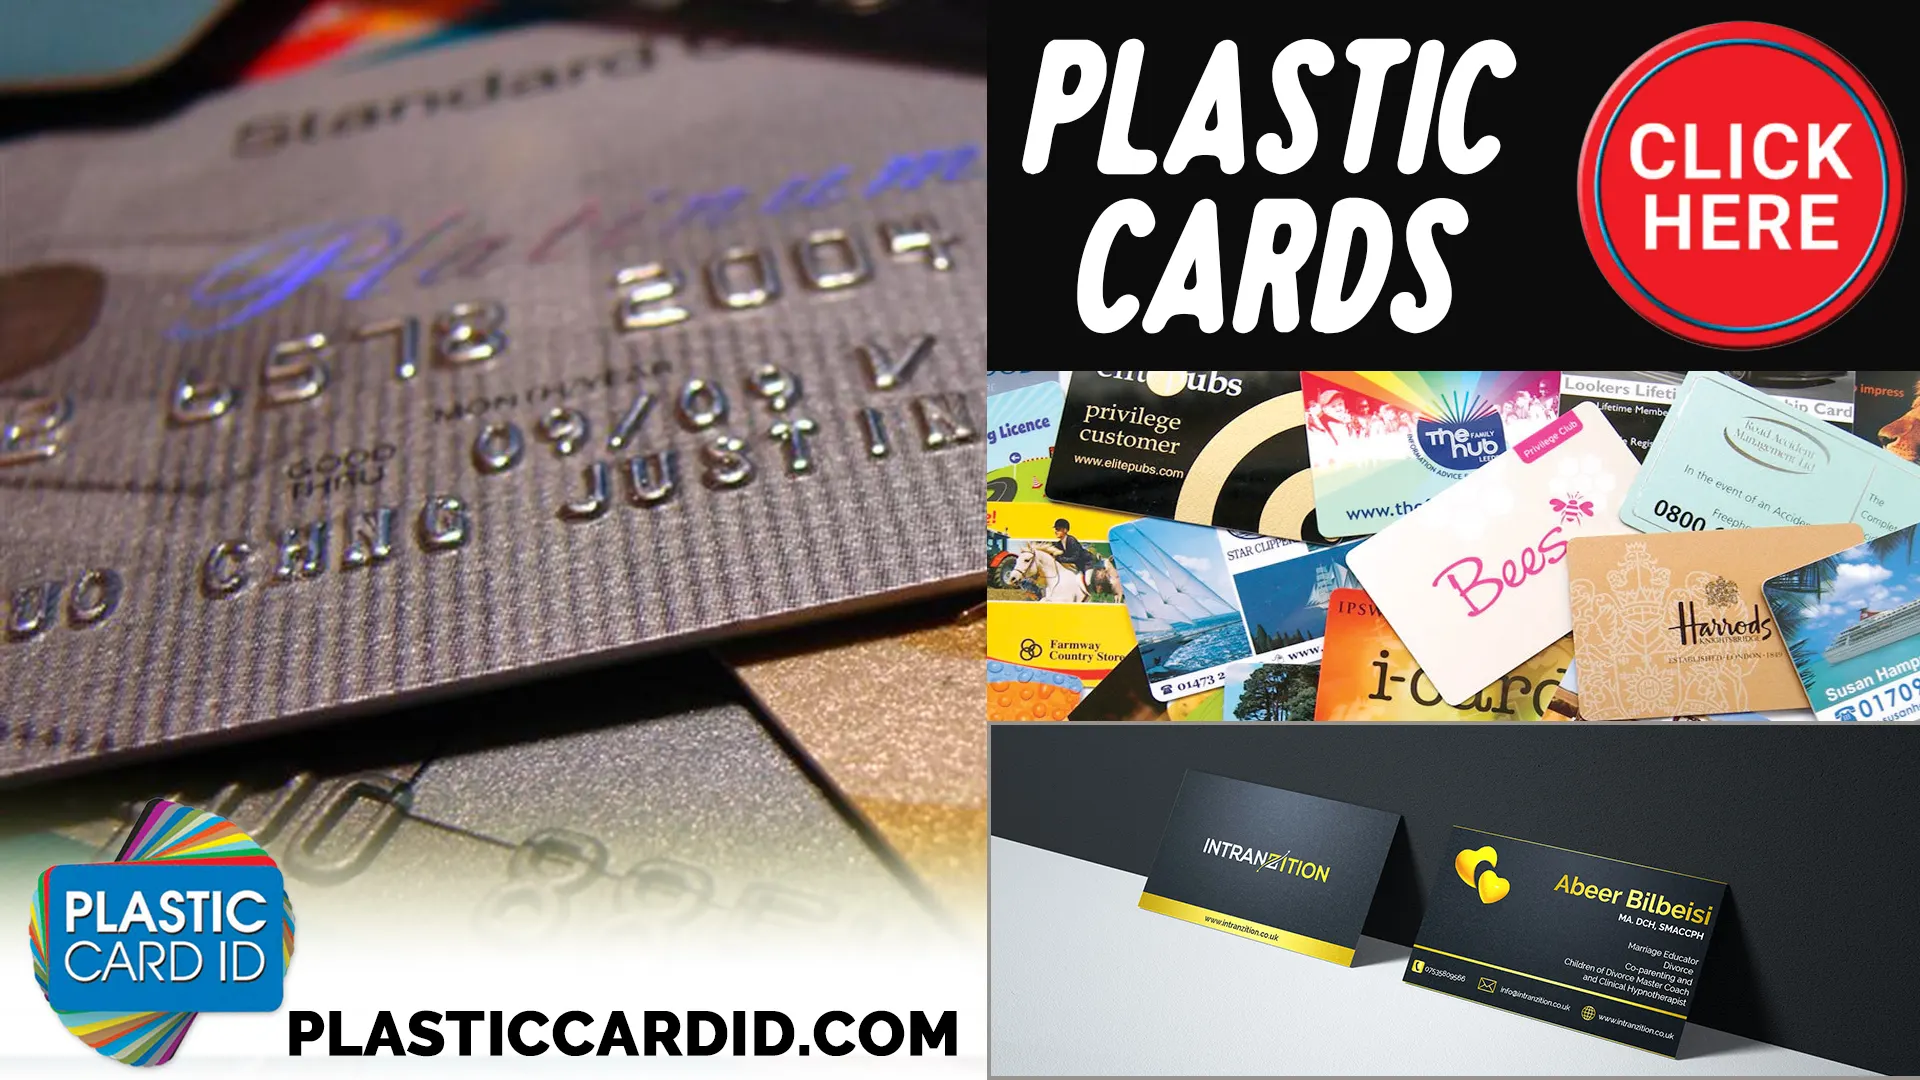 Welcome to the World of Customized Plastic Cards